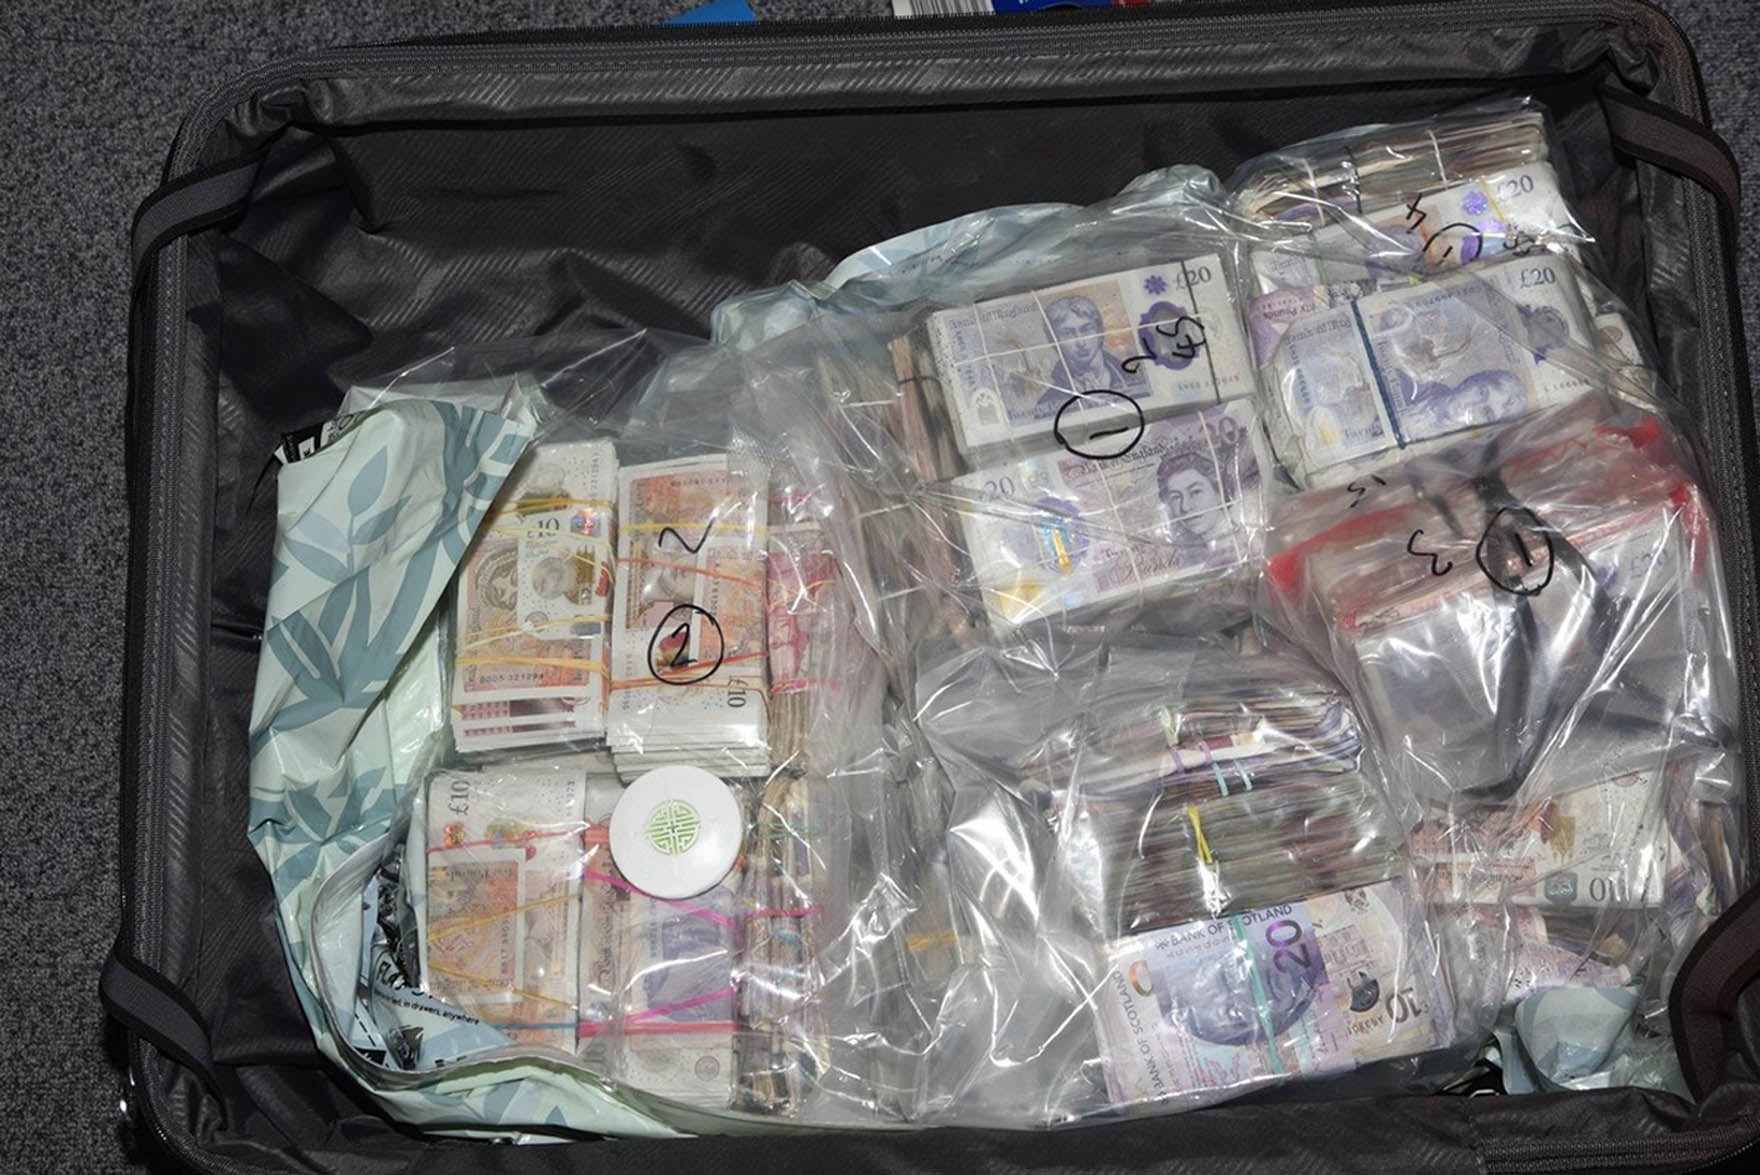 The money was concealed in vacuum-packed bags